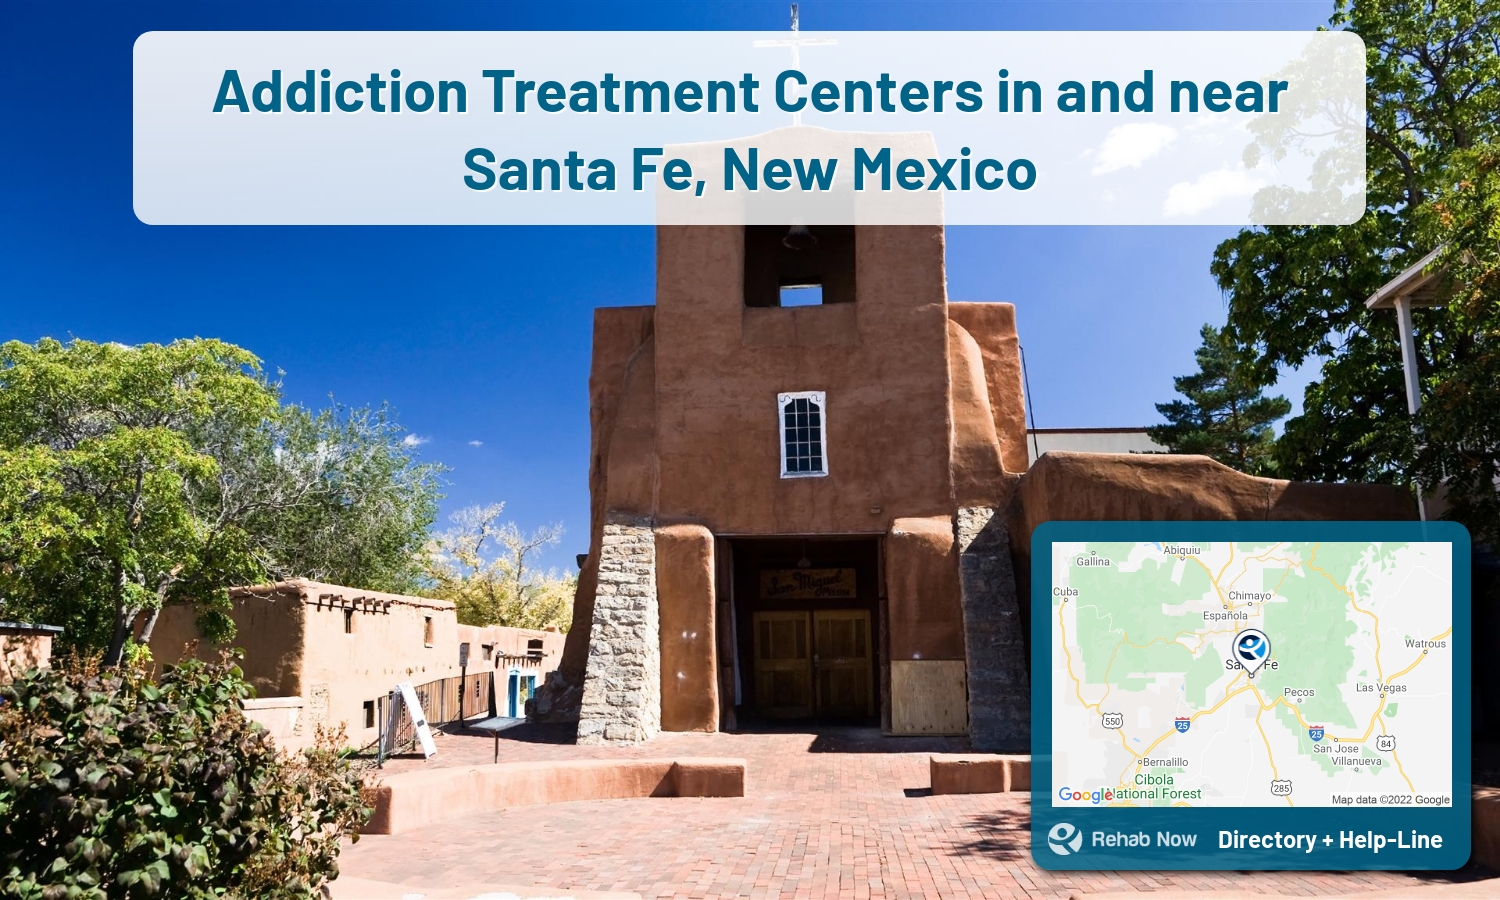 Our experts can help you find treatment now in Santa Fe, New Mexico. We list drug rehab and alcohol centers in New Mexico.